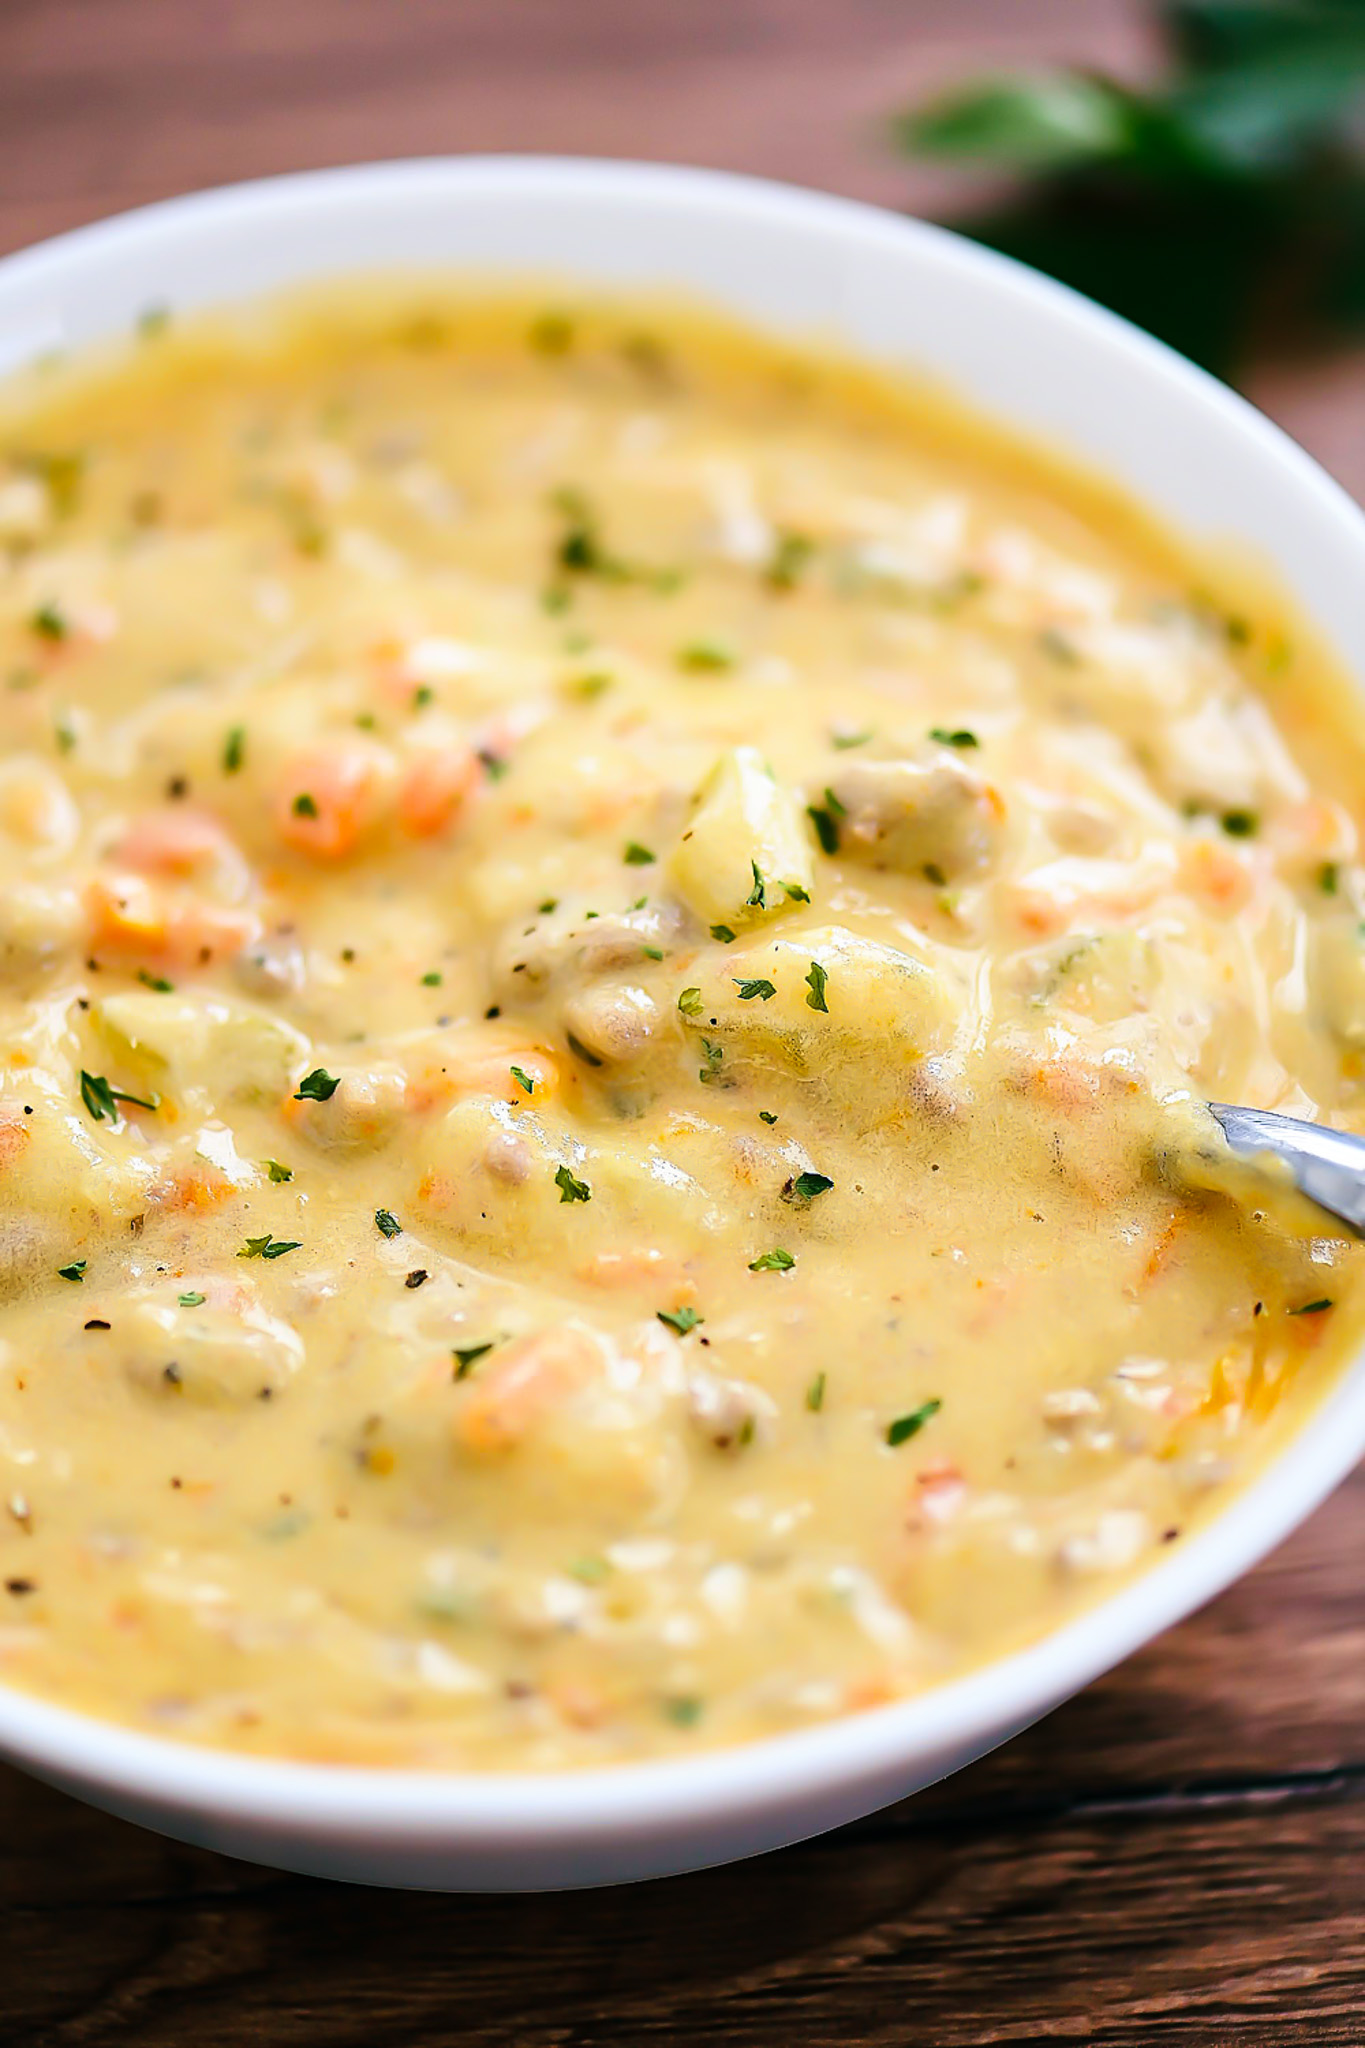 Creamy soup loaded with beef, potatoes, carrots and more. 